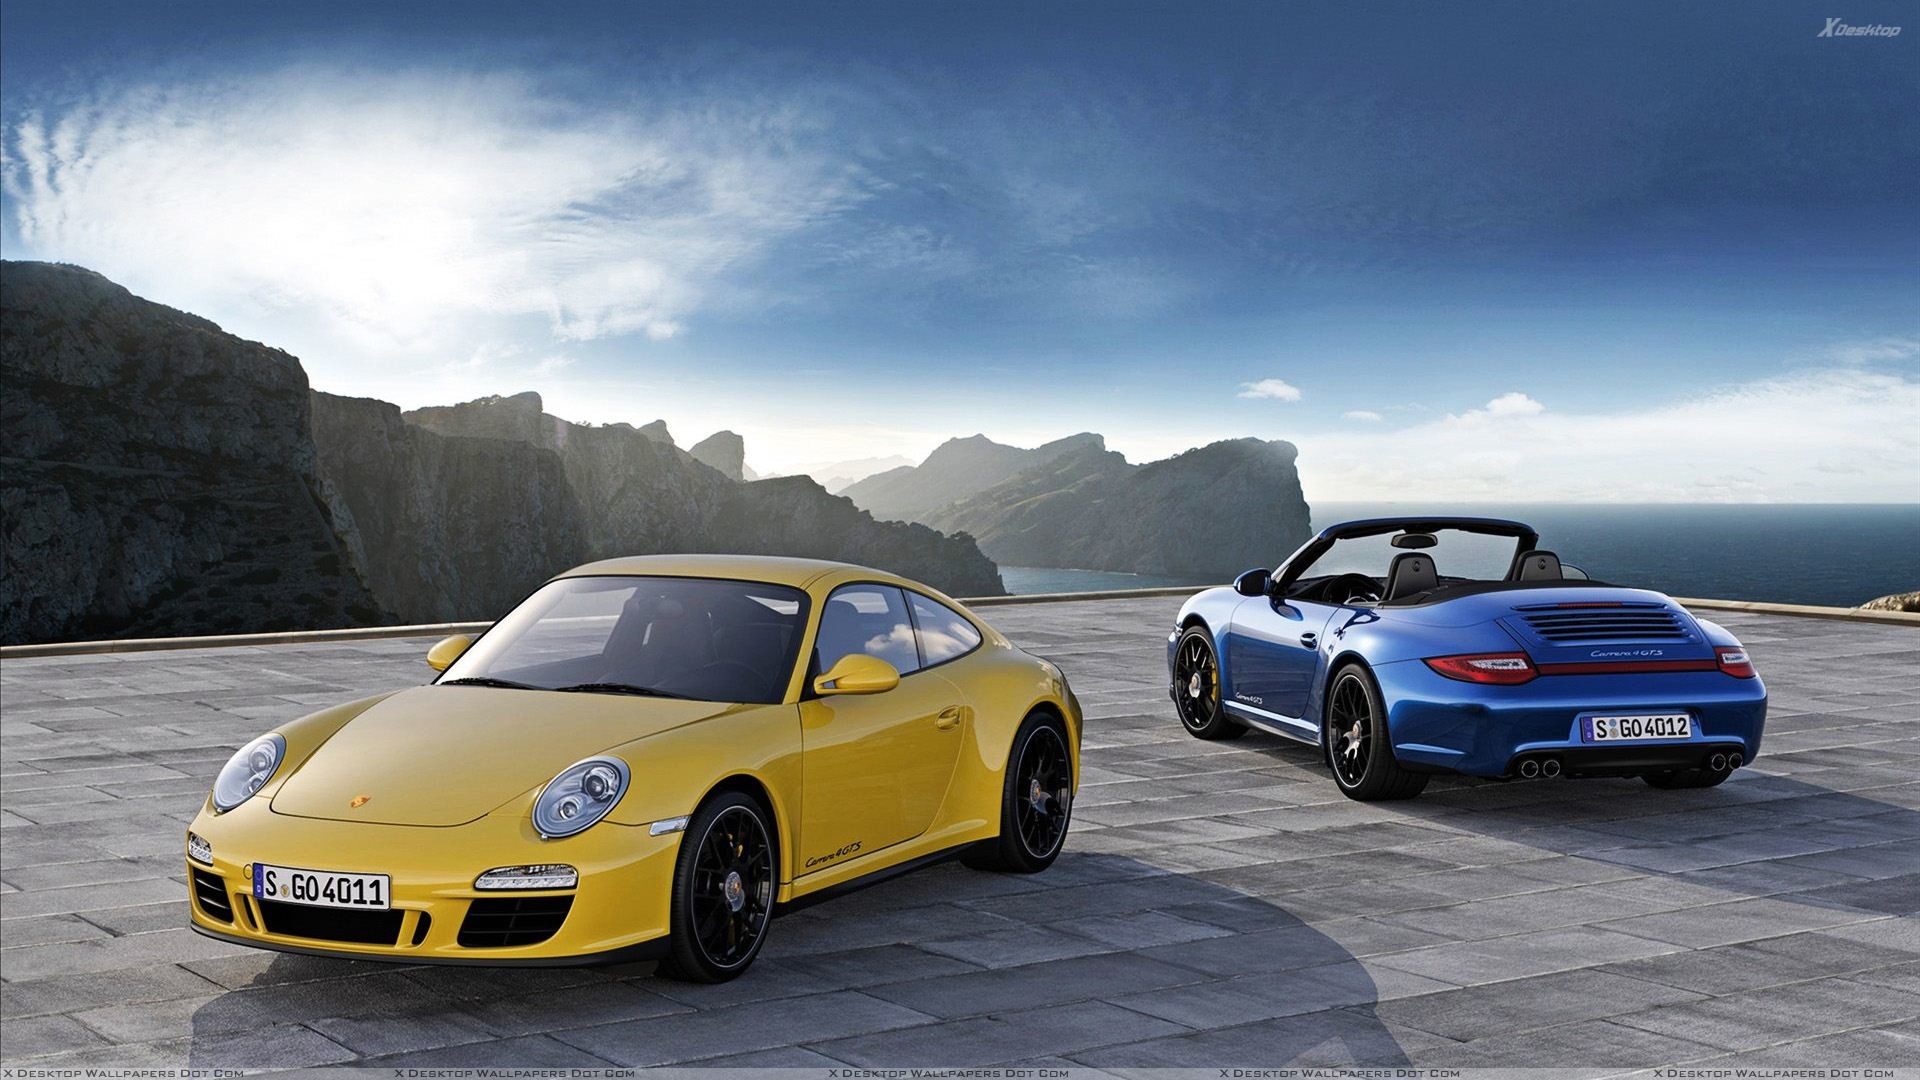 1920x1080 You are viewing wallpaper titled "2012 Porsche 911 ...